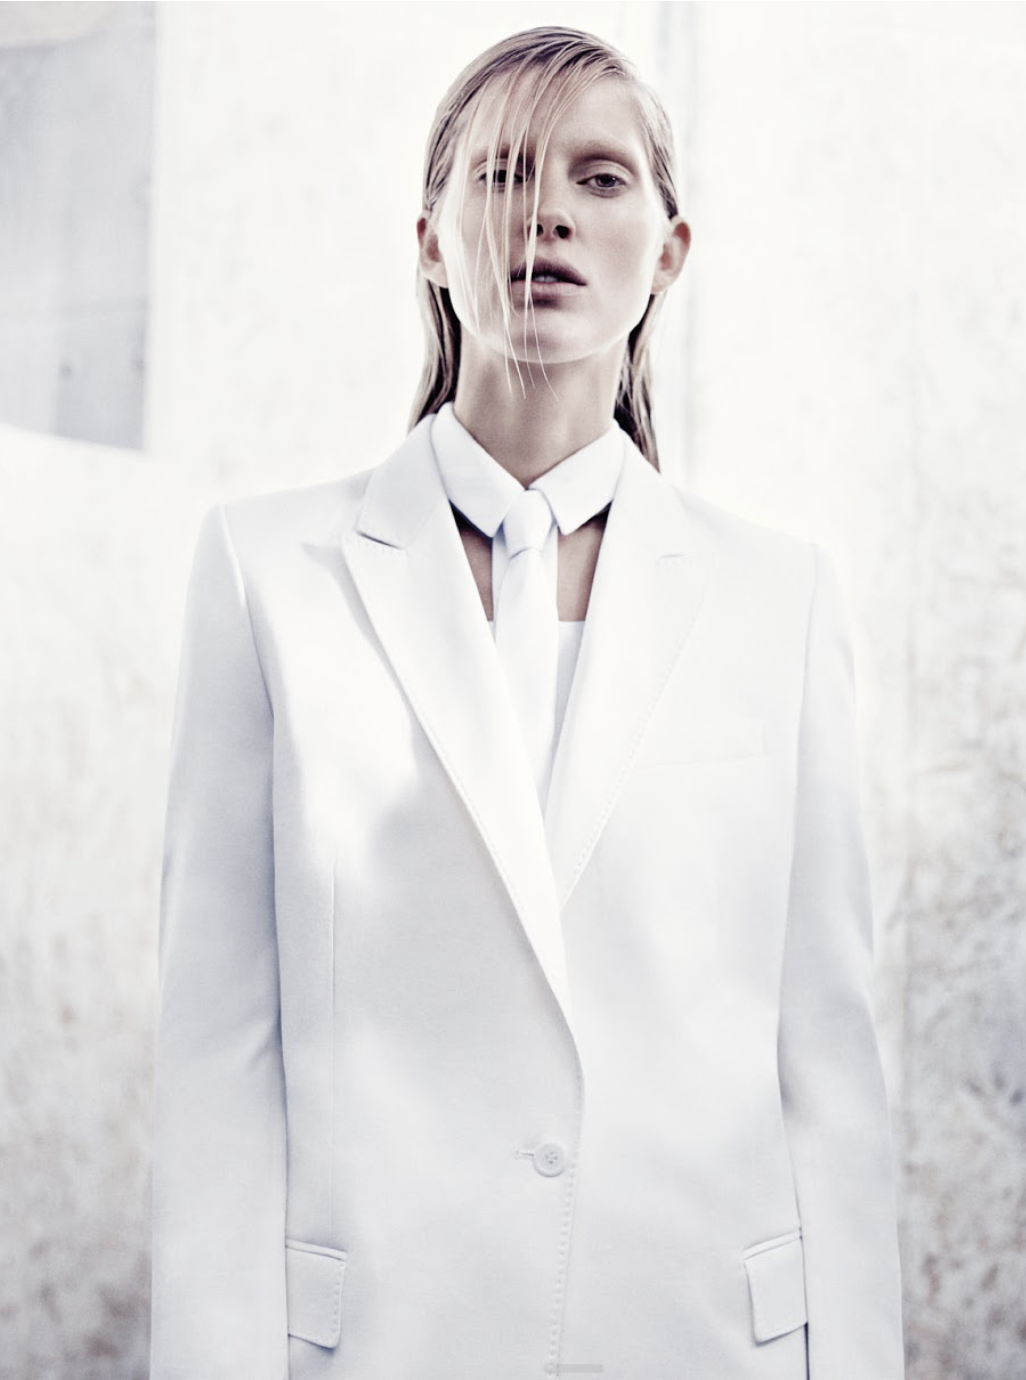 Iselin-Steiro-by-Craig-McDean-Vogue-UK-March-2013-12.png